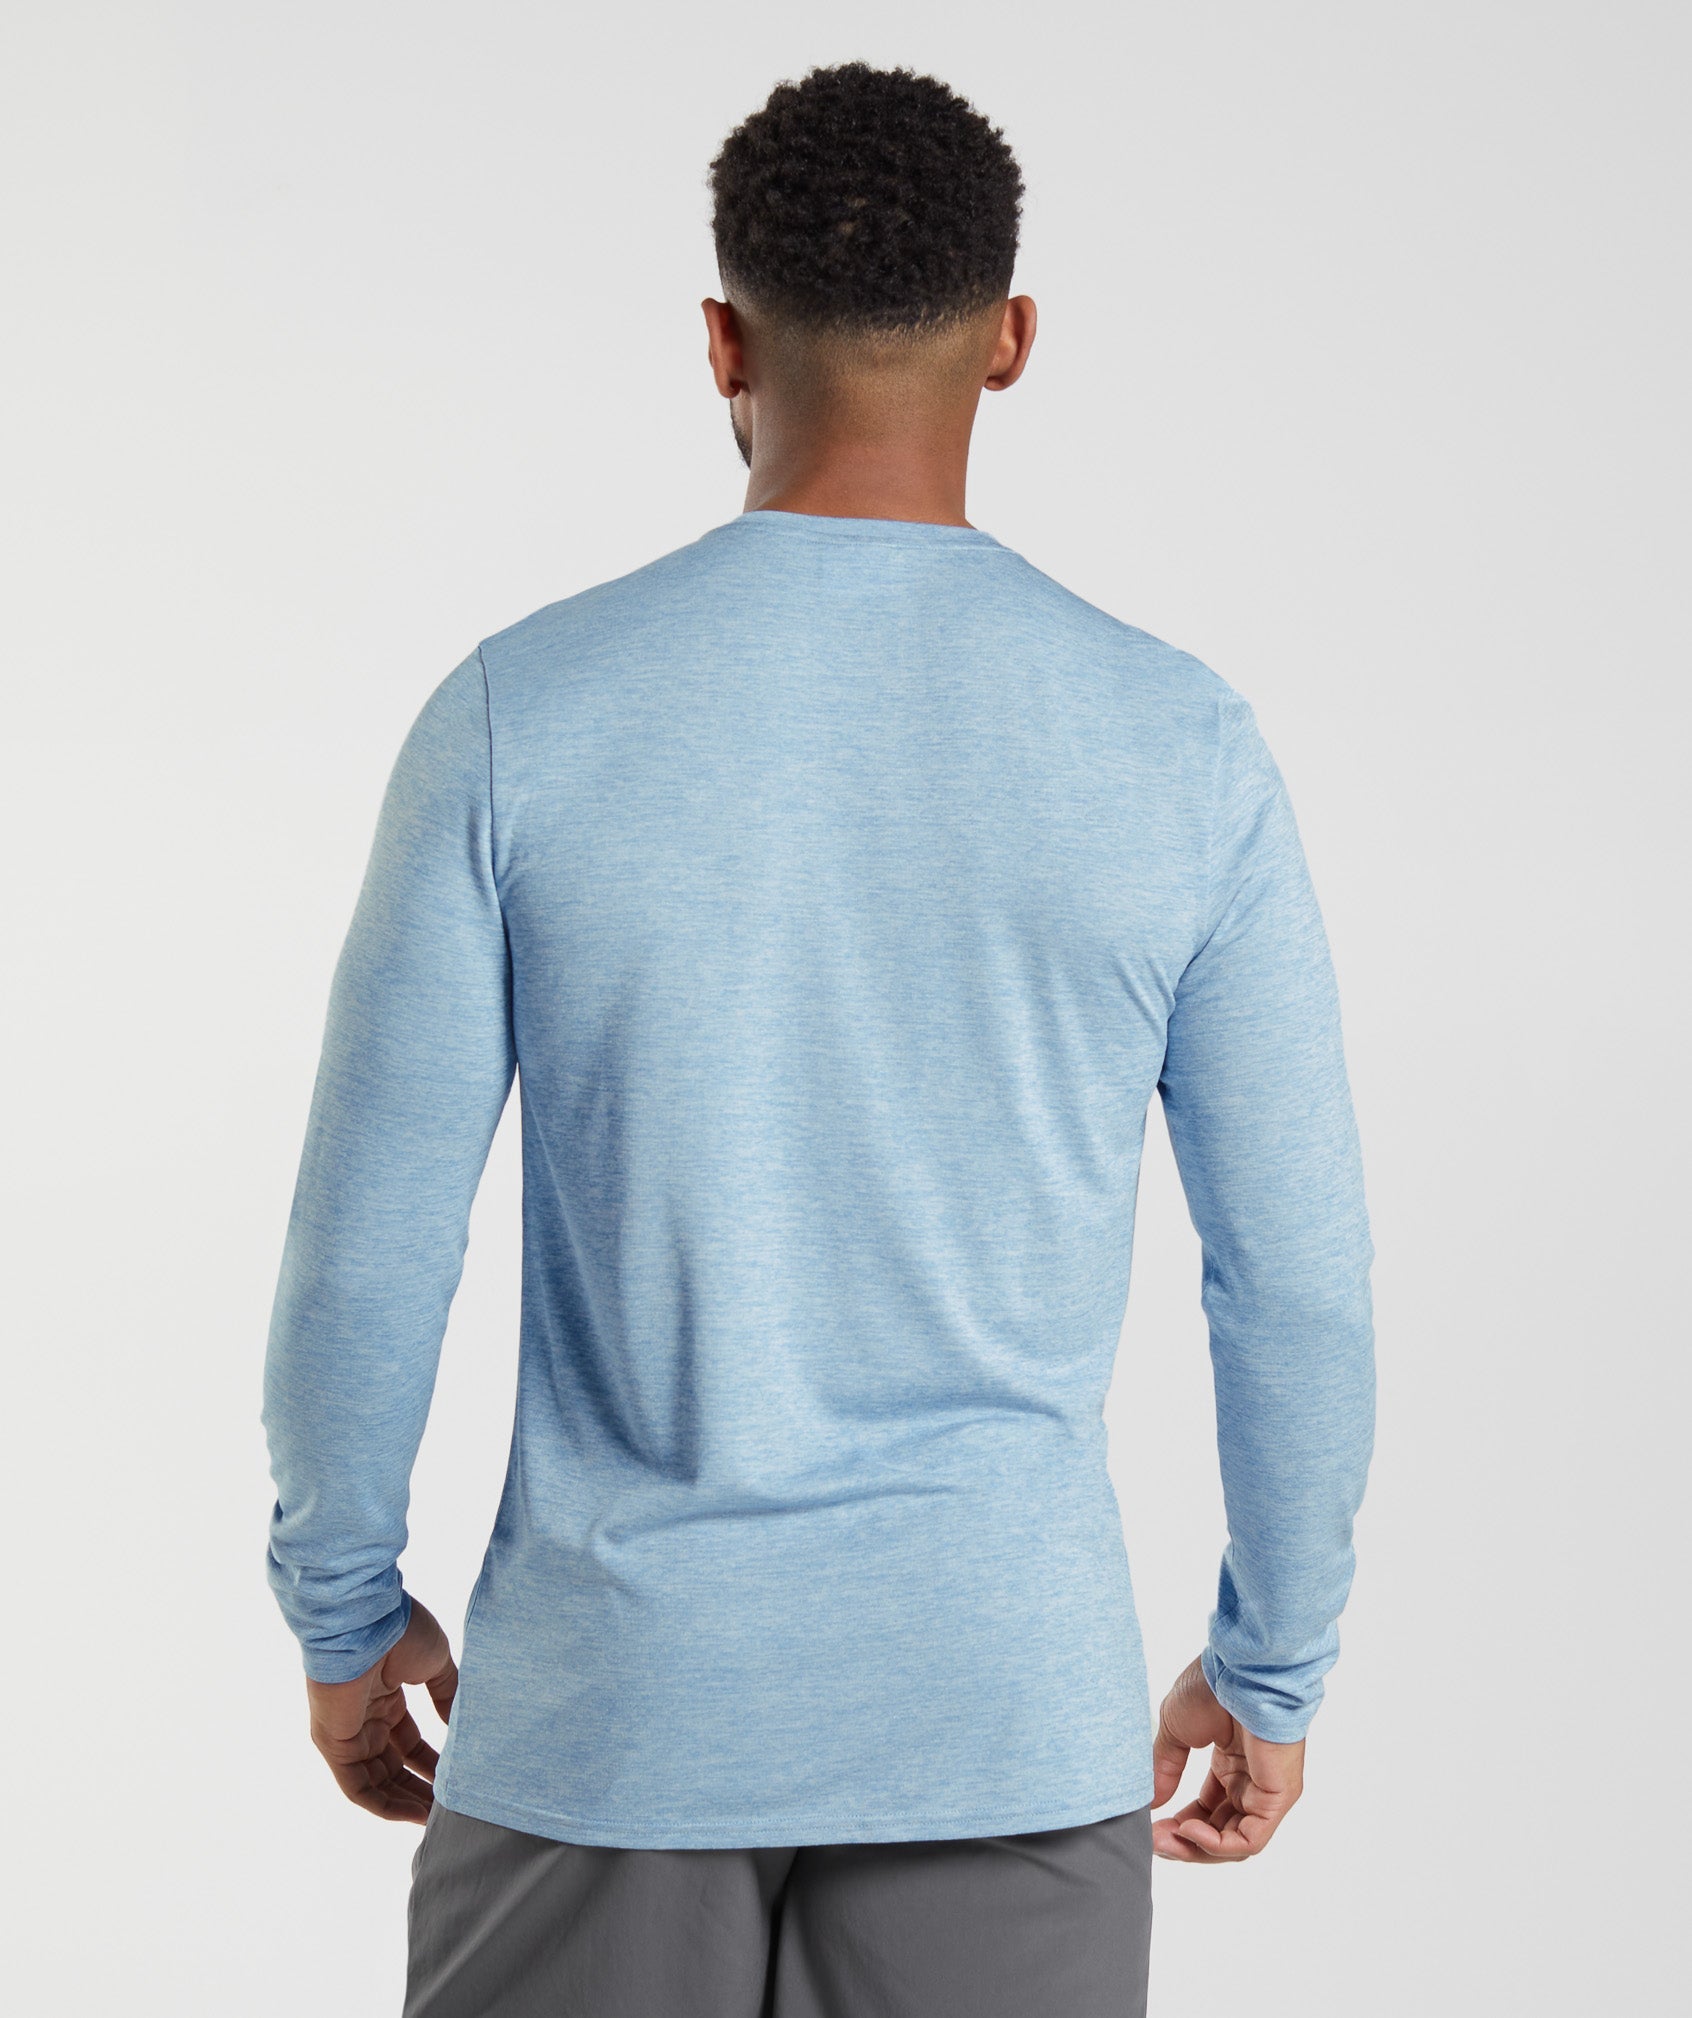 Arrival Long Sleeve T-Shirt in Ozone Blue/Skyline Blue Marl - view 2